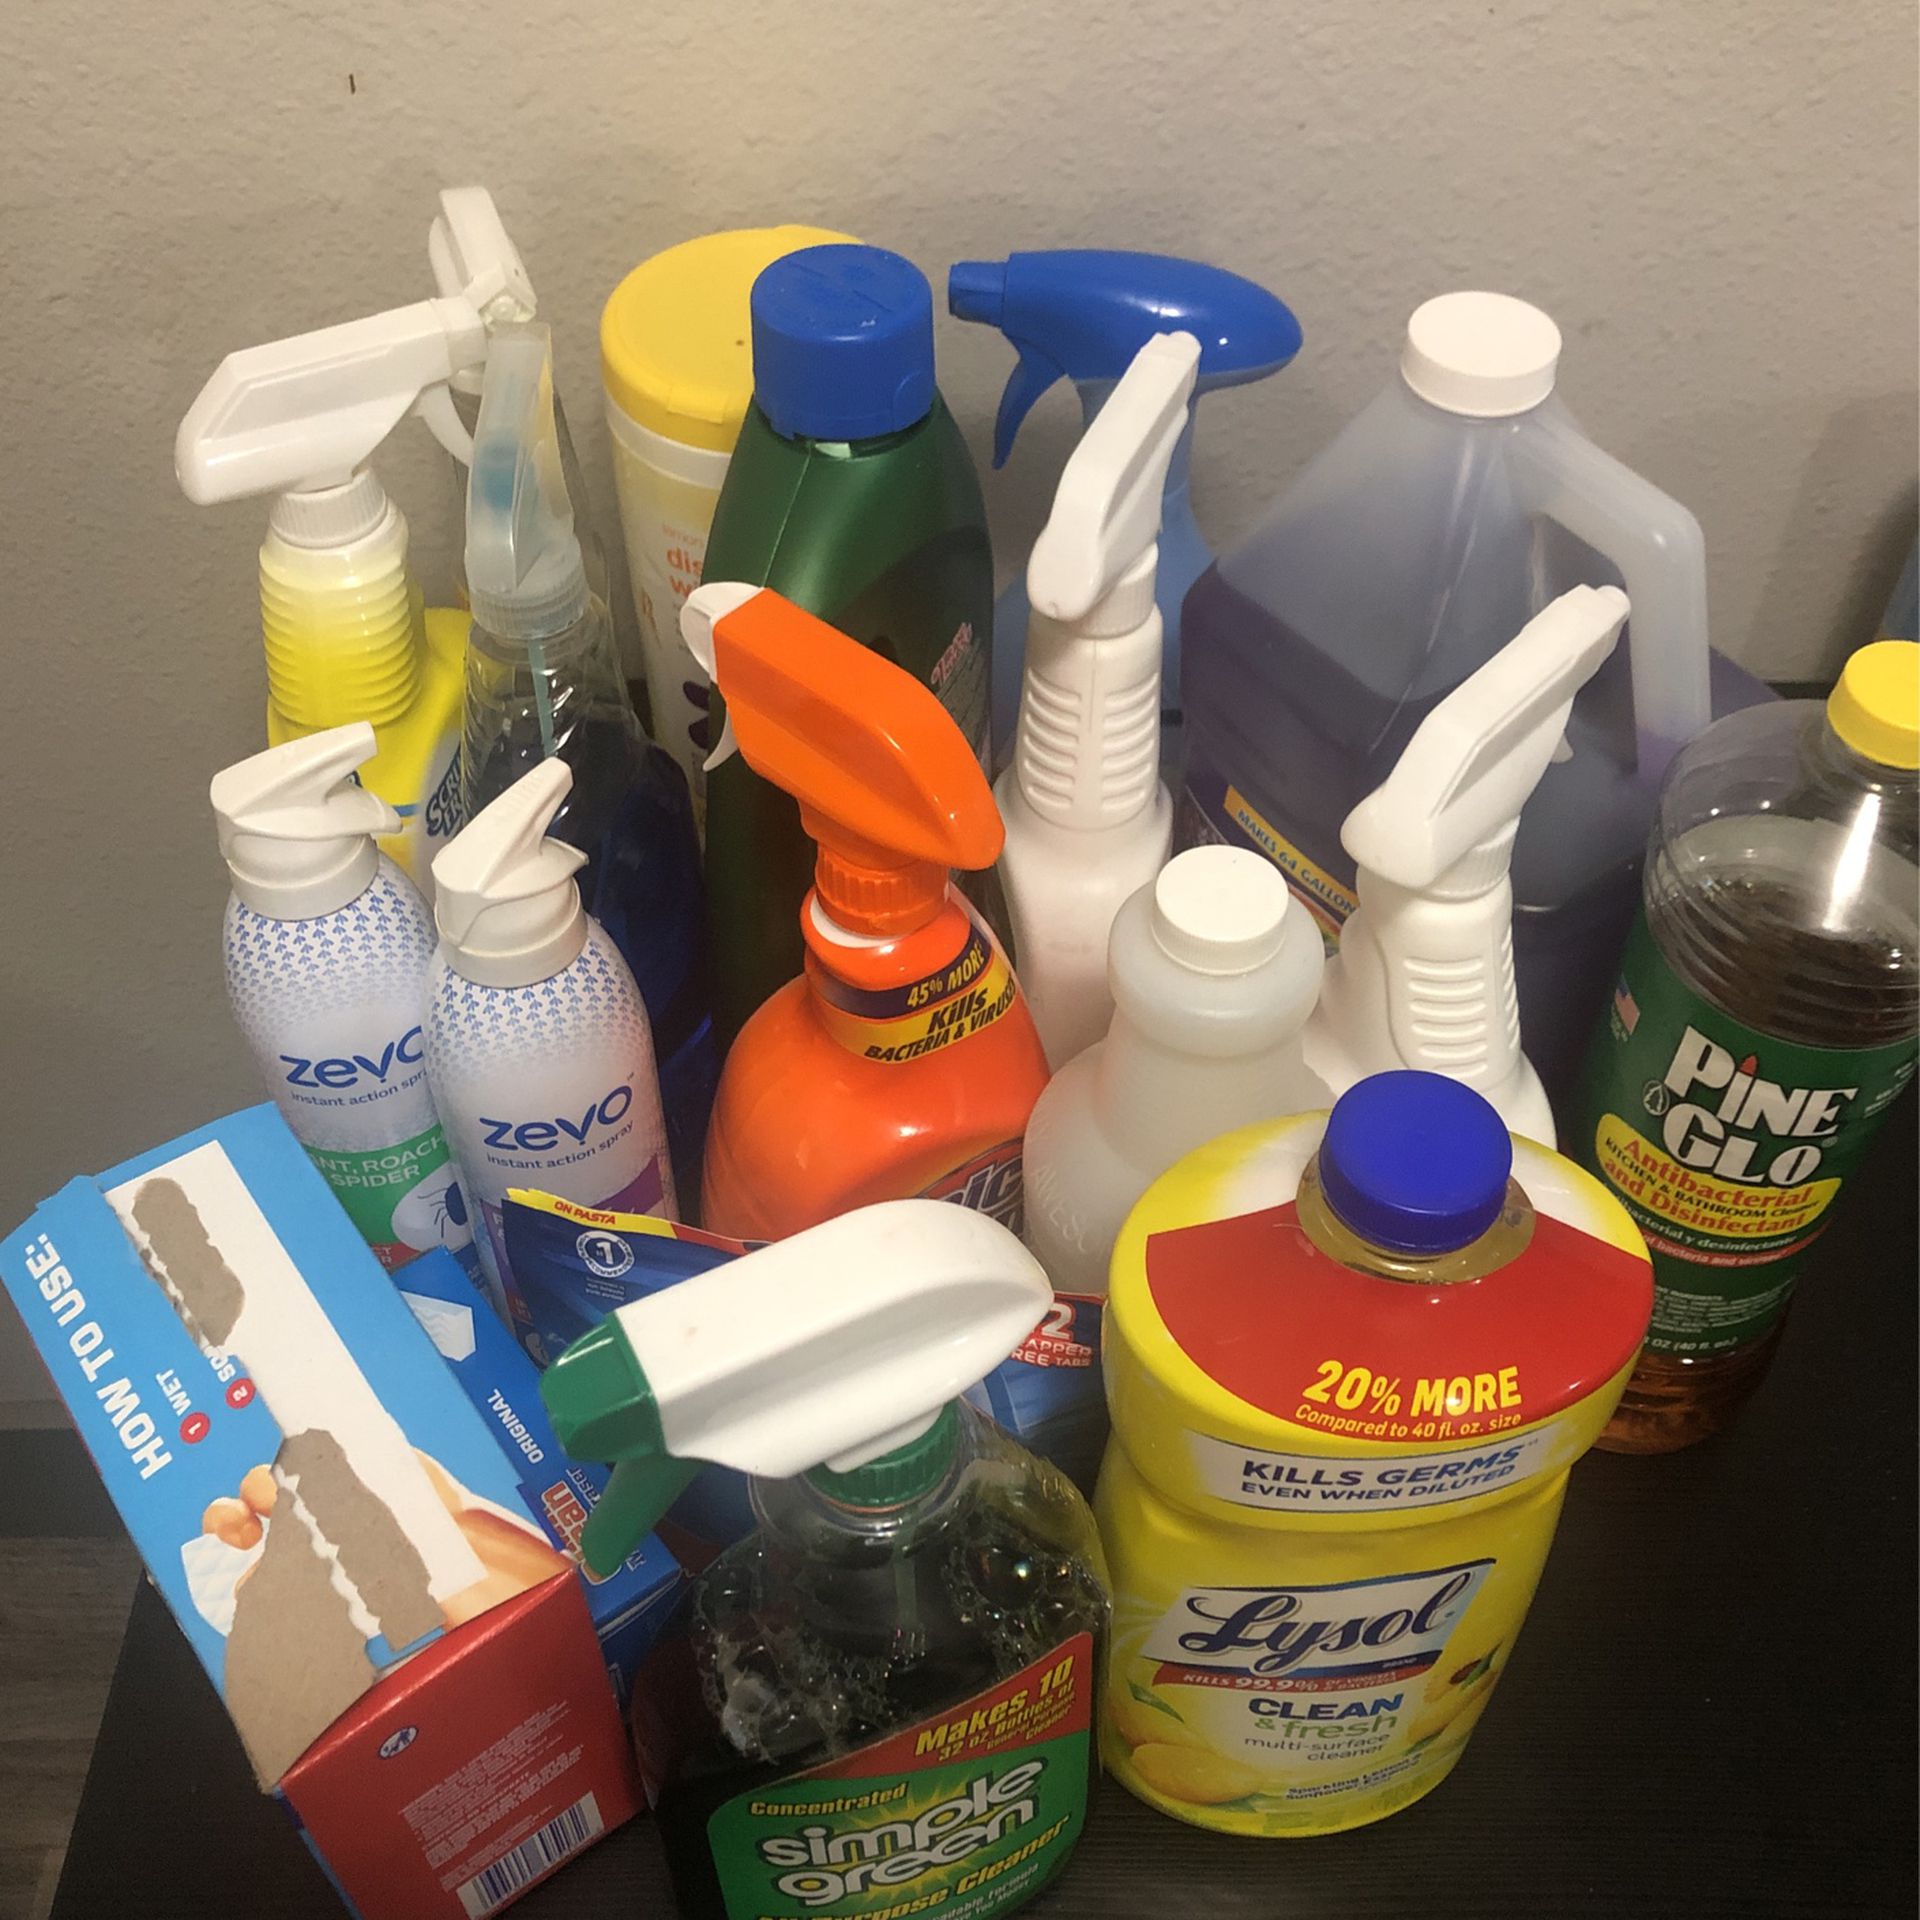 FREE CLEANING SUPPLIES